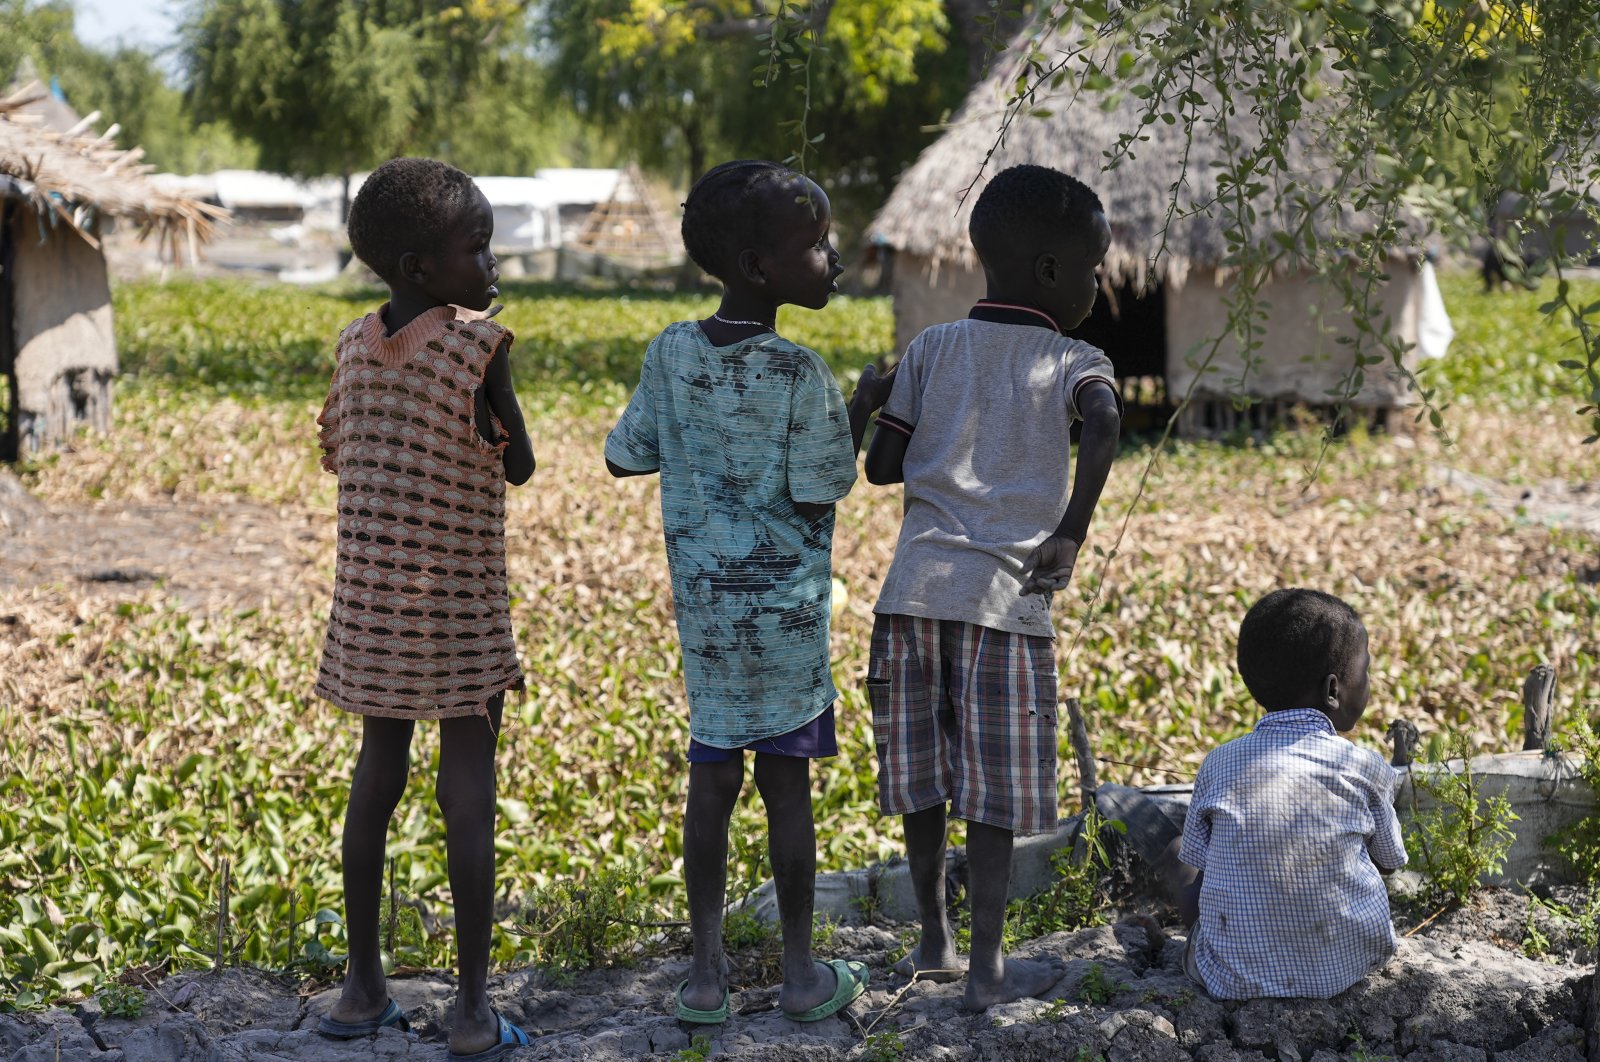 Children look out across the community of Old Fangak in Jonglei state, South Sudan, Dec. 28, 2021. (AP Photo)